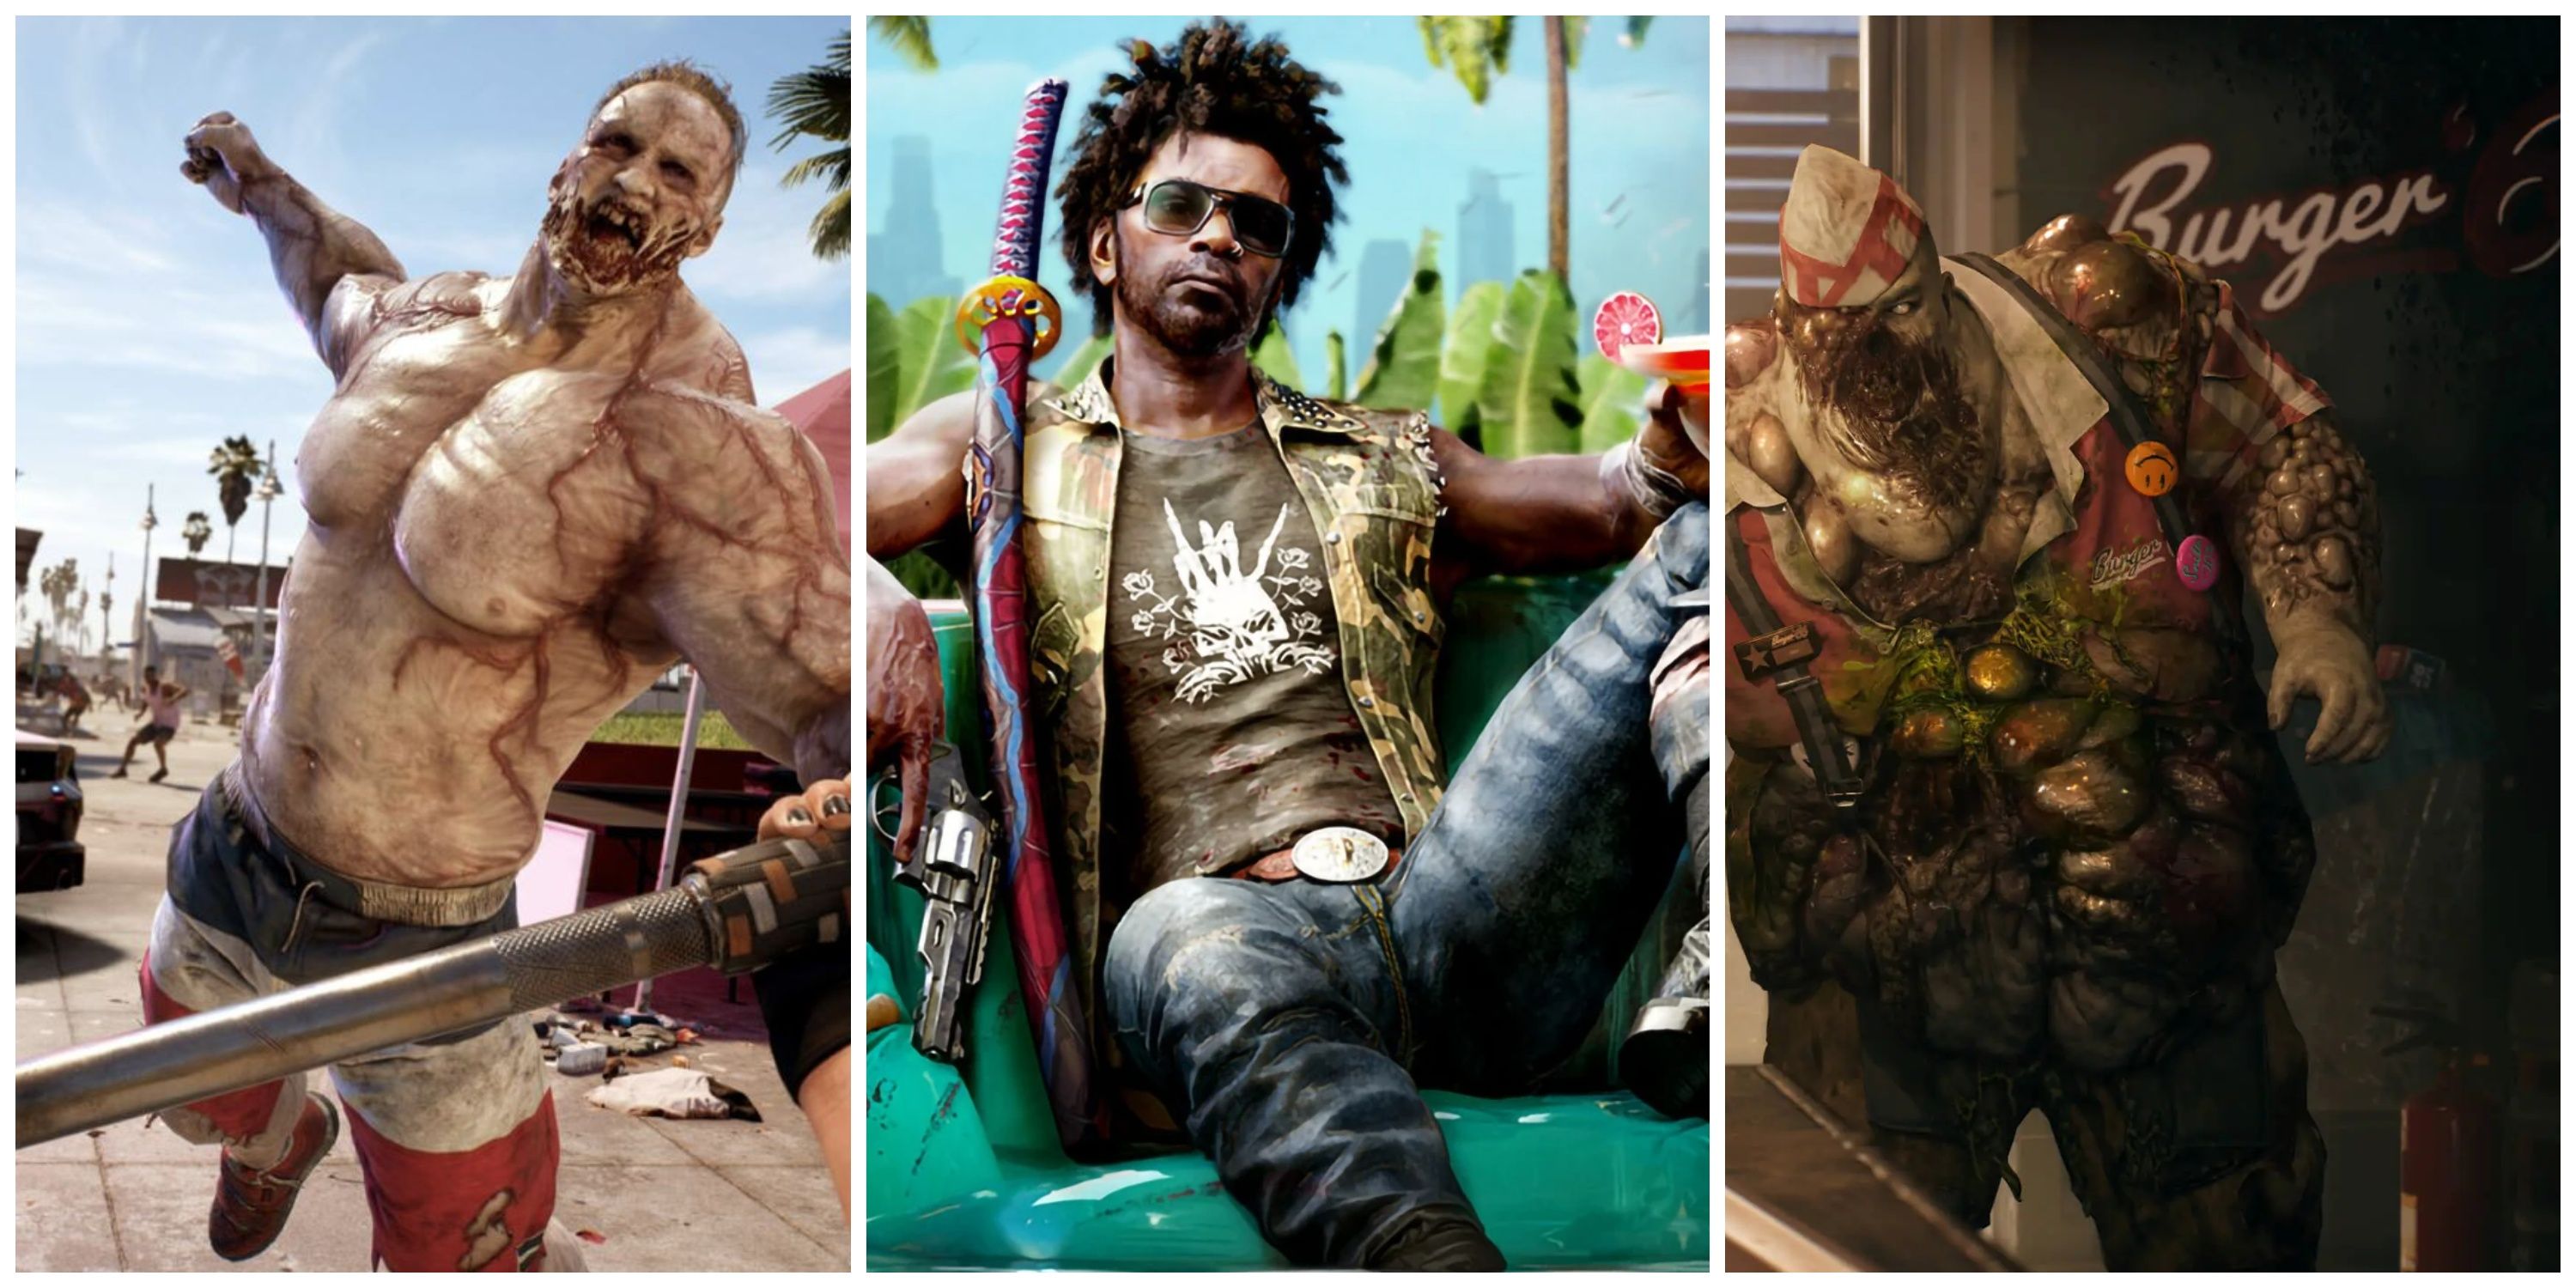 Here's Your Complete Guide To Dead Island 2 Multiplayer